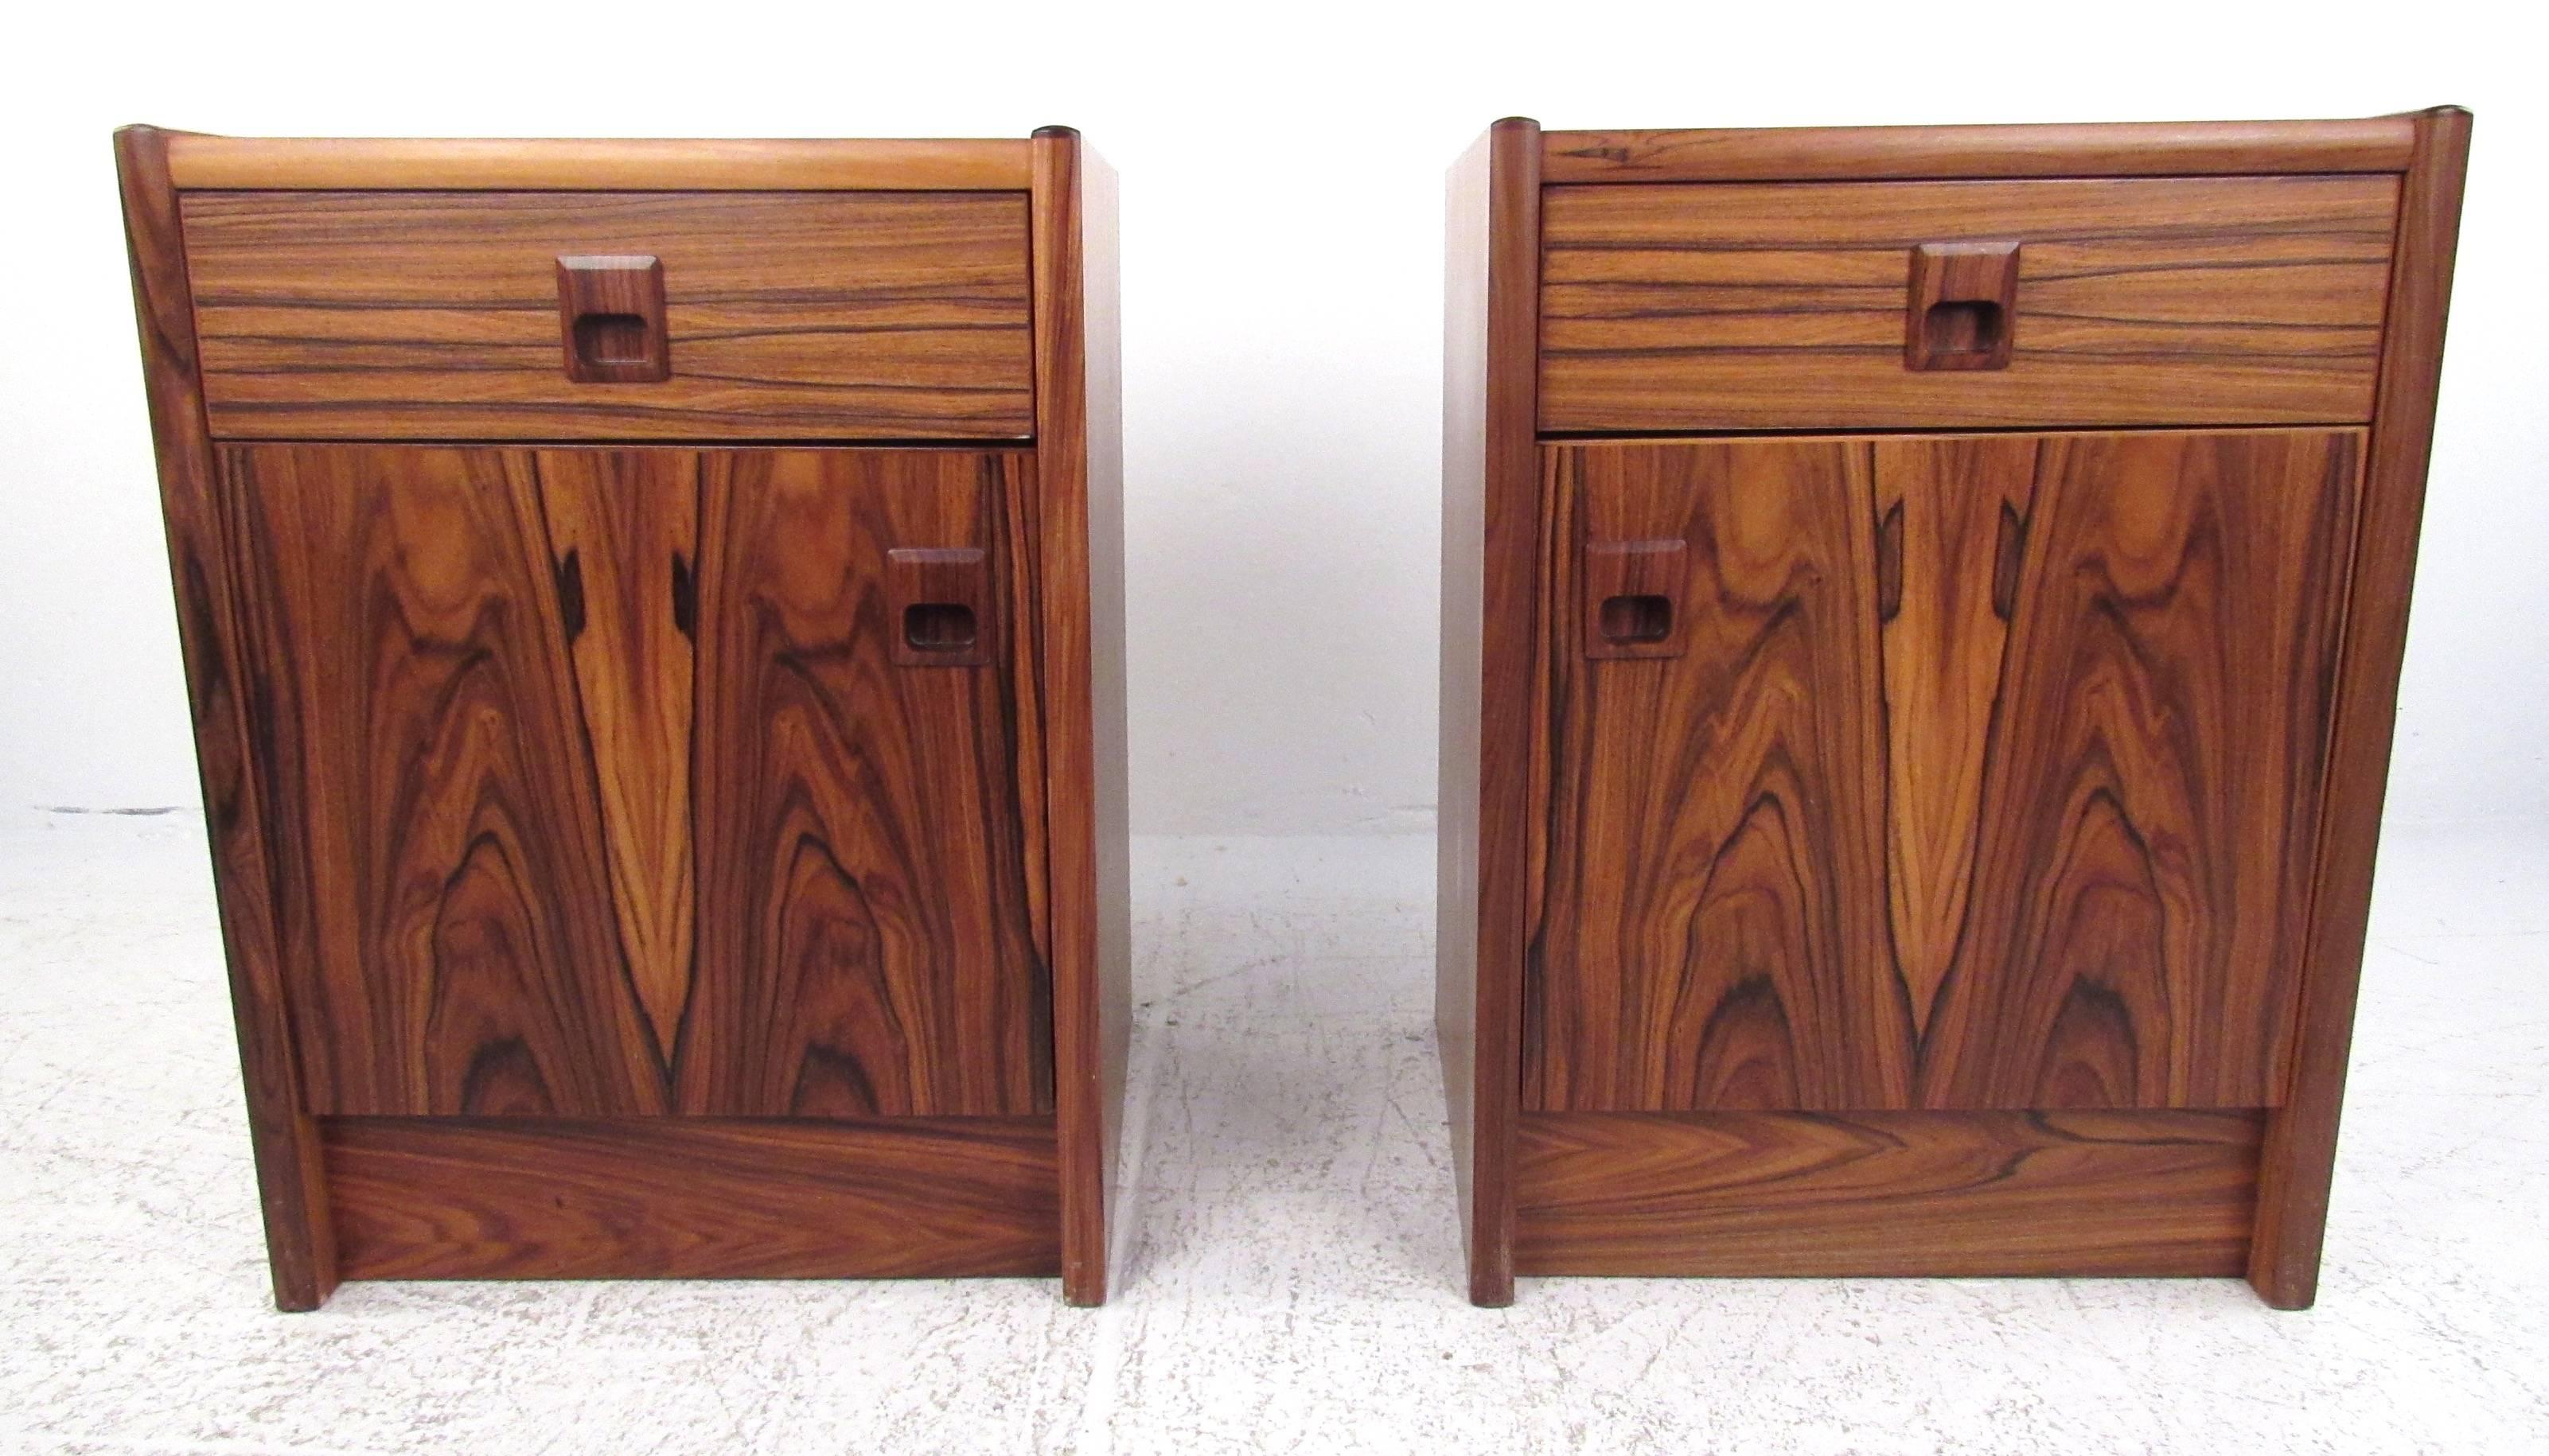 Pair of single drawer rosewood nightstands with storage compartment below.